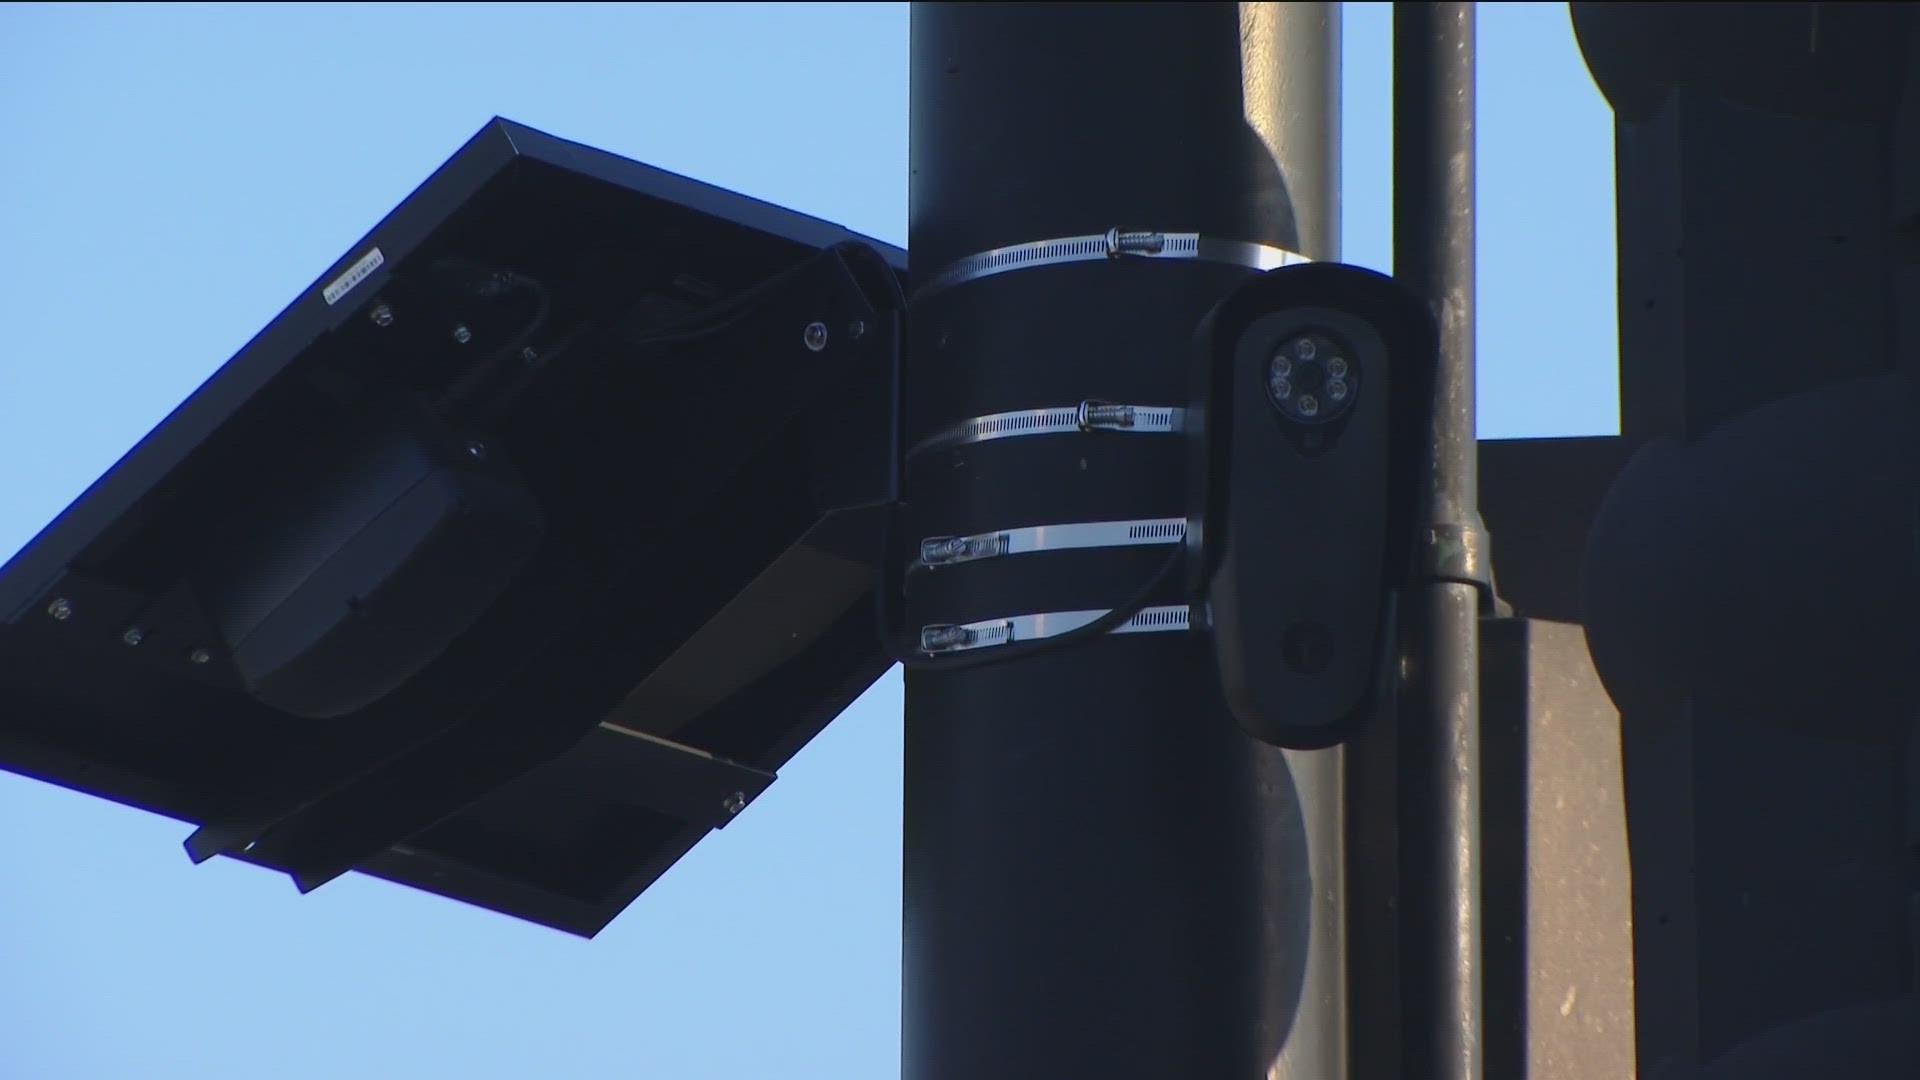 There are forty license plate reading cameras throughout the city of El Cajon.